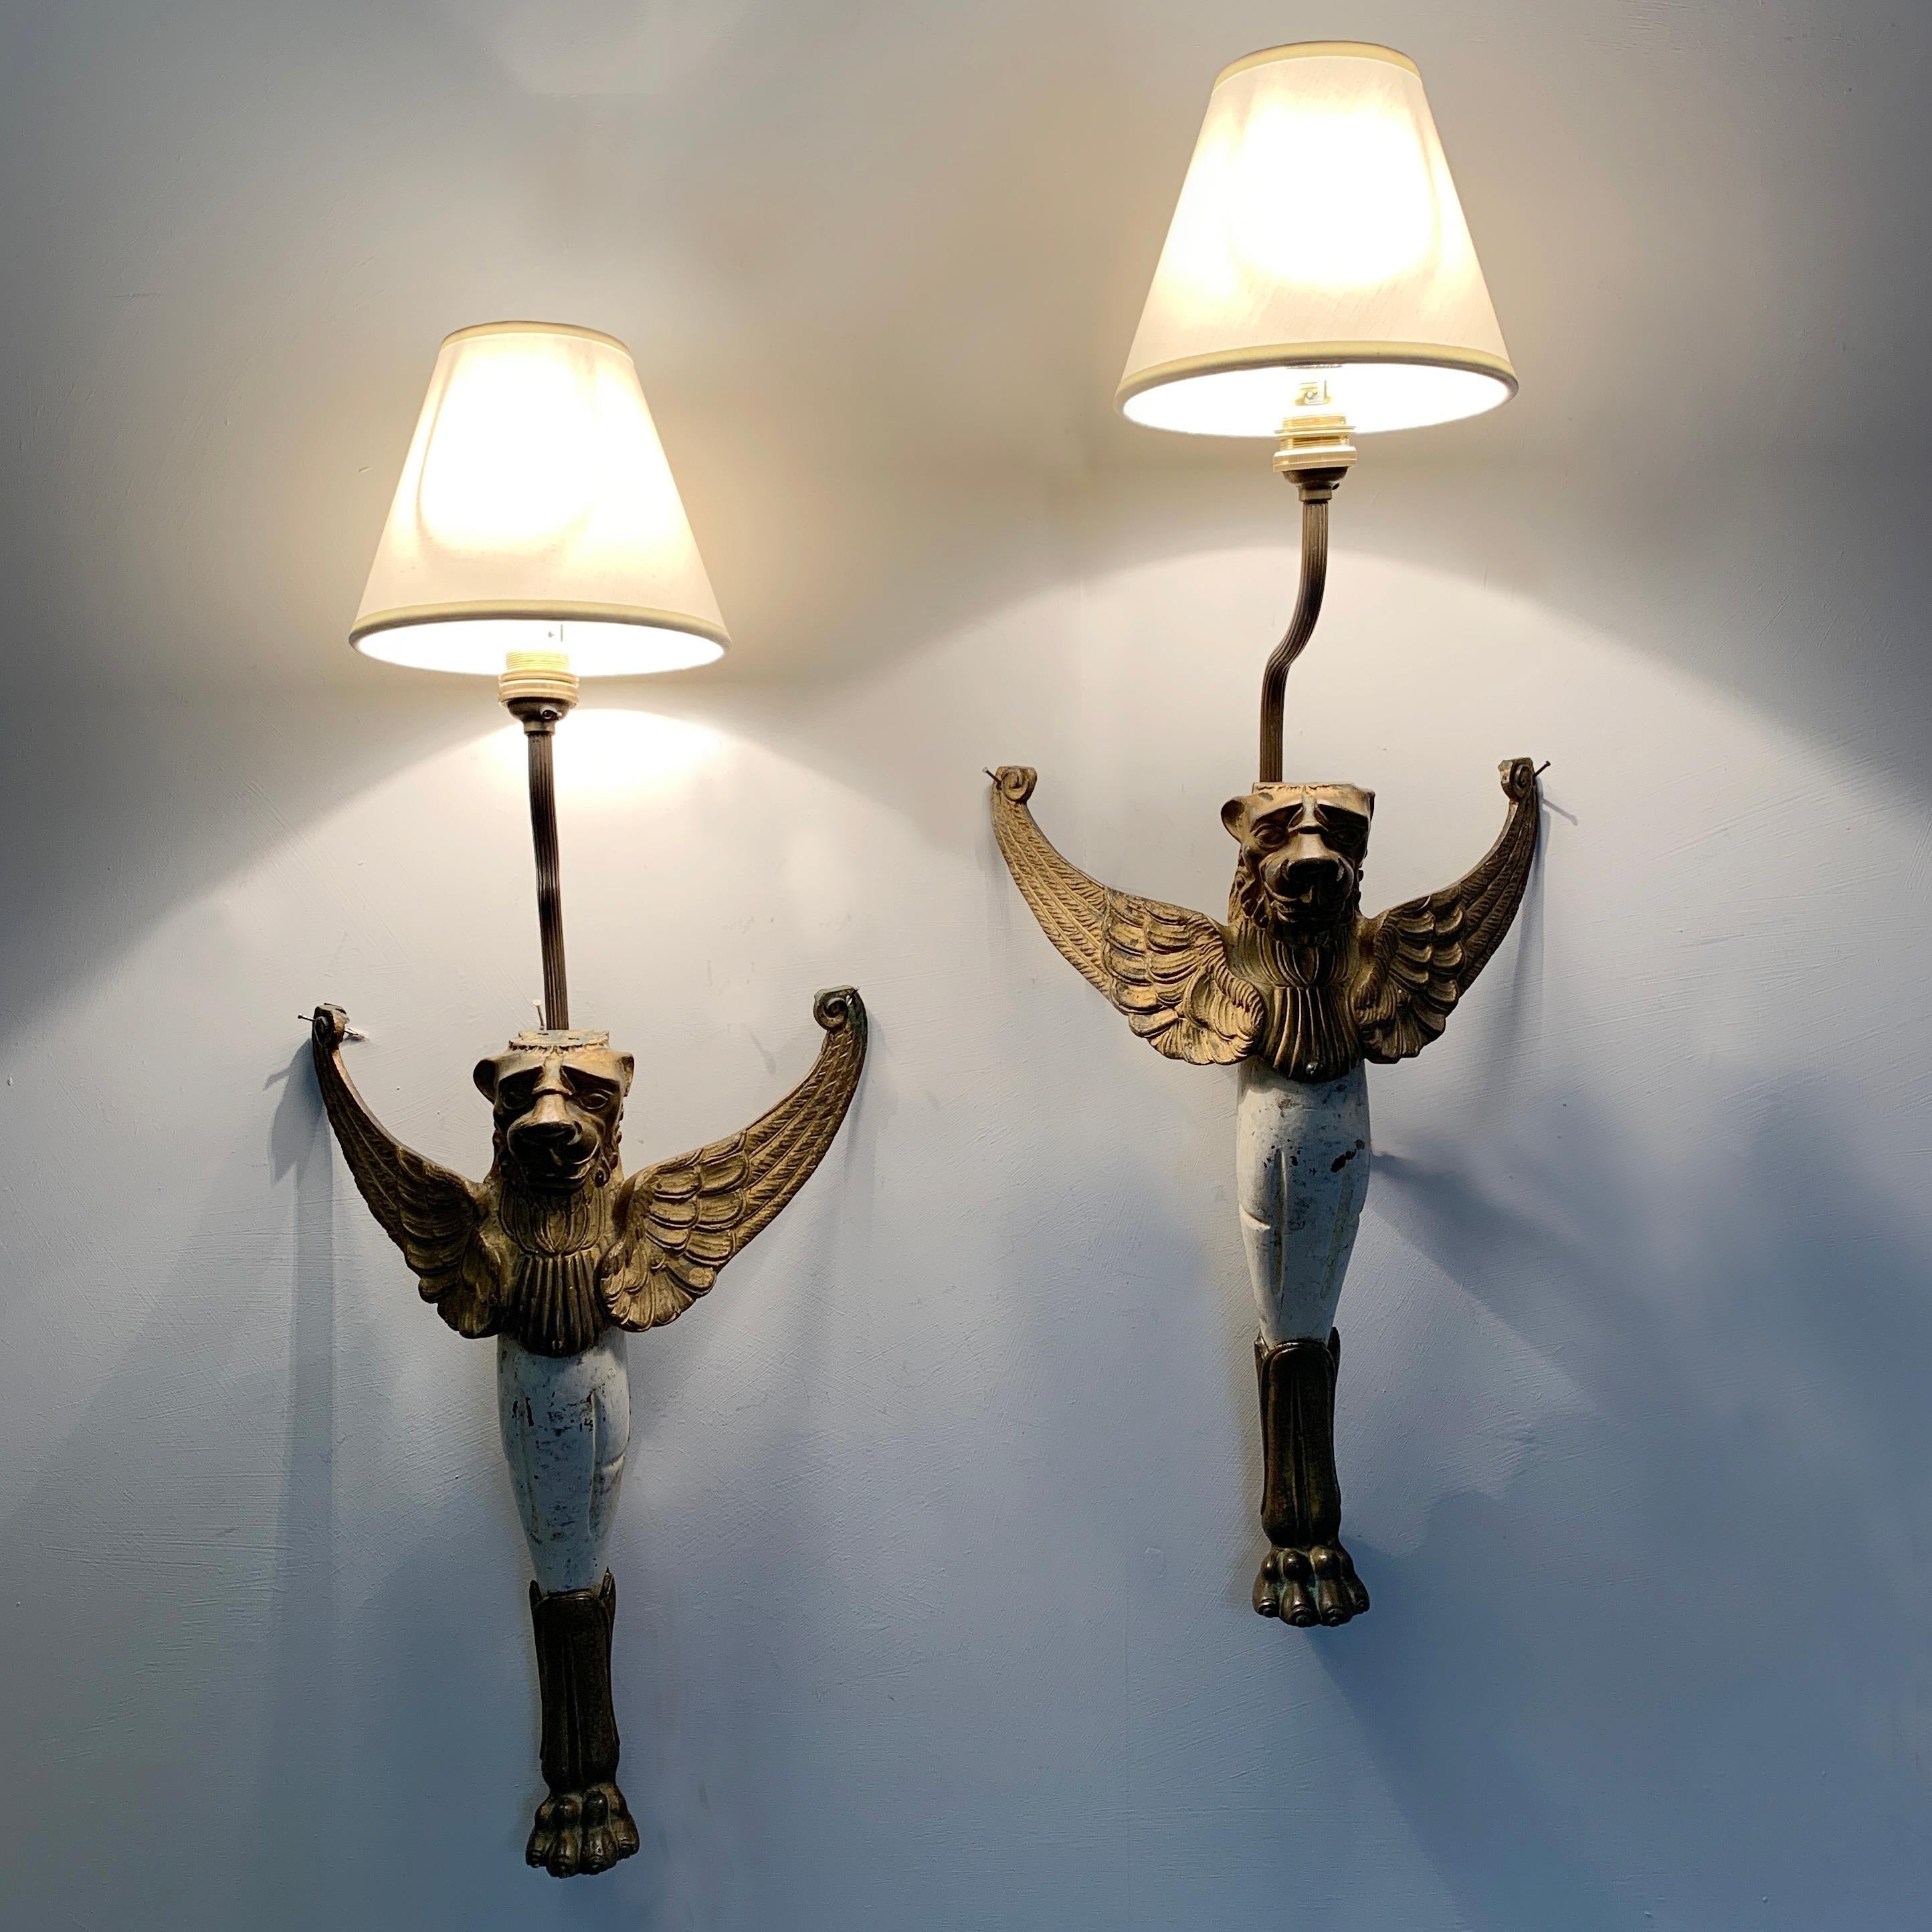 Early 19th century, winged griffin wall lights
Fantastic Georgian griffins, repurposed historically into wall lights
The body is made from wood with solid brass head, wings and feet
The lights have a tall reeded stem holding a single lamp holder